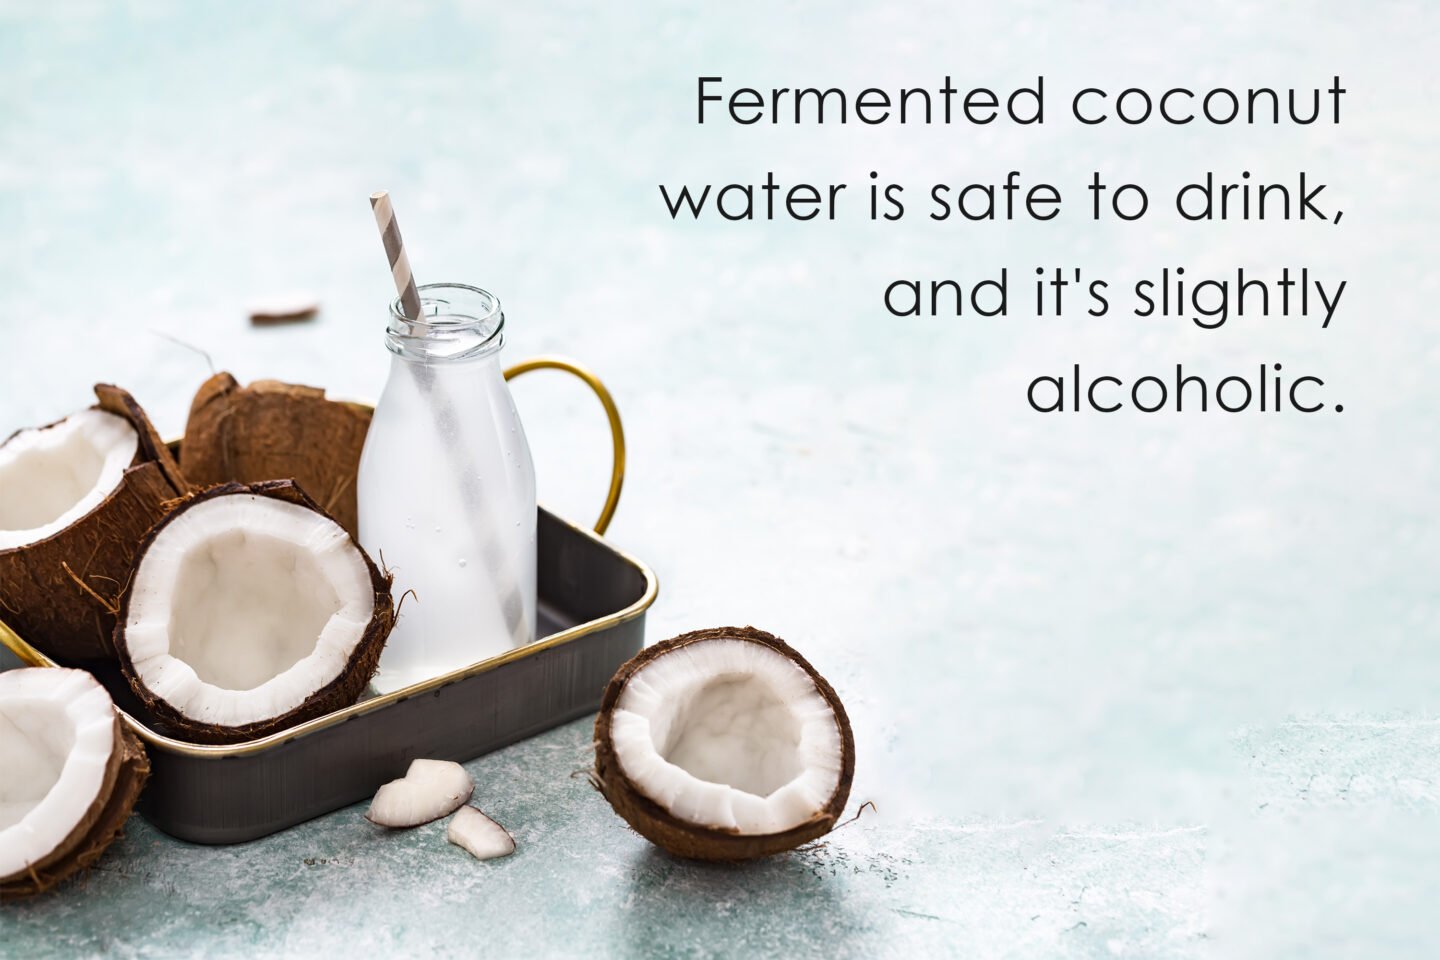 fermented coconut water is safe